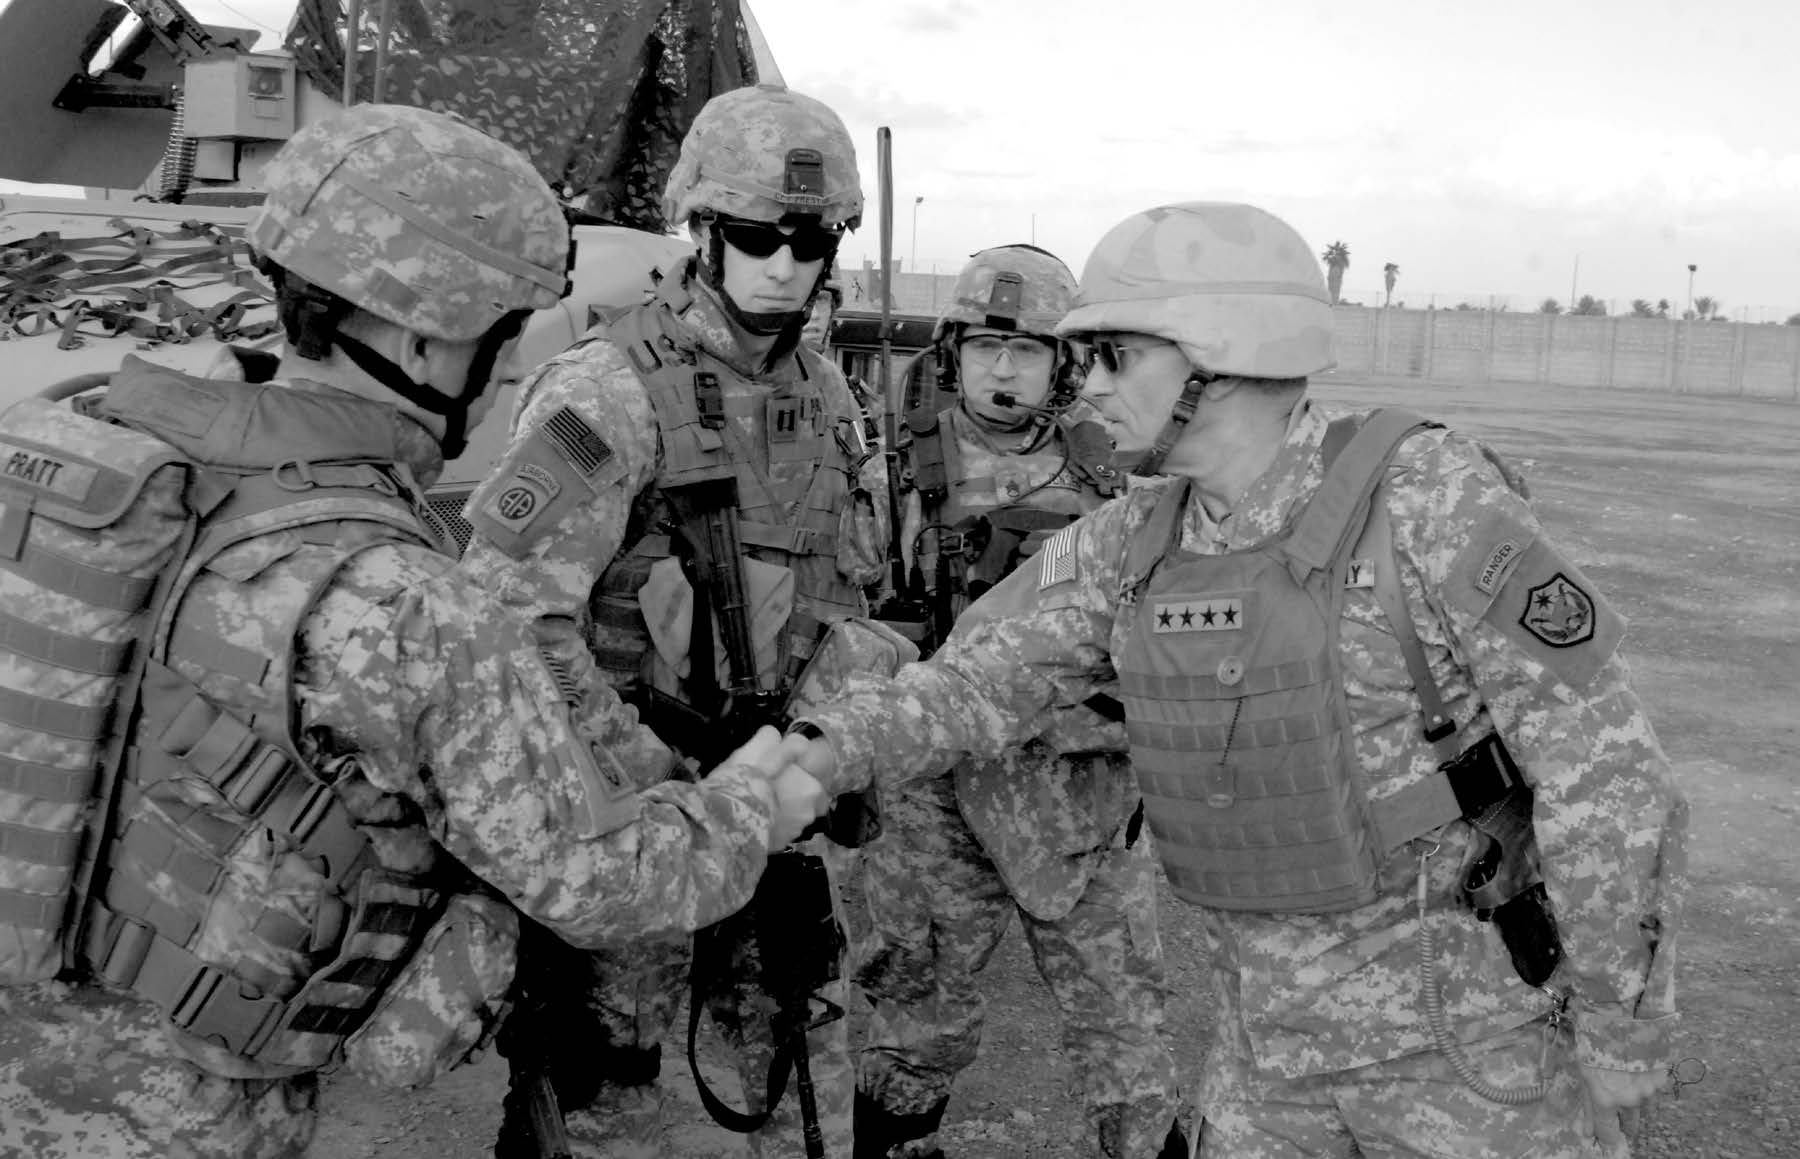 U.S. Army soldiers from the 504th Parachute Infantry Regiment shake hands with General George Casey (right), the commanding general of the multinational forces in Iraq, after a briefing at Forward Operating Base Shield in the Rusafa area of East Baghdad, Iraq, during February 2007. Courtesy of DoD.